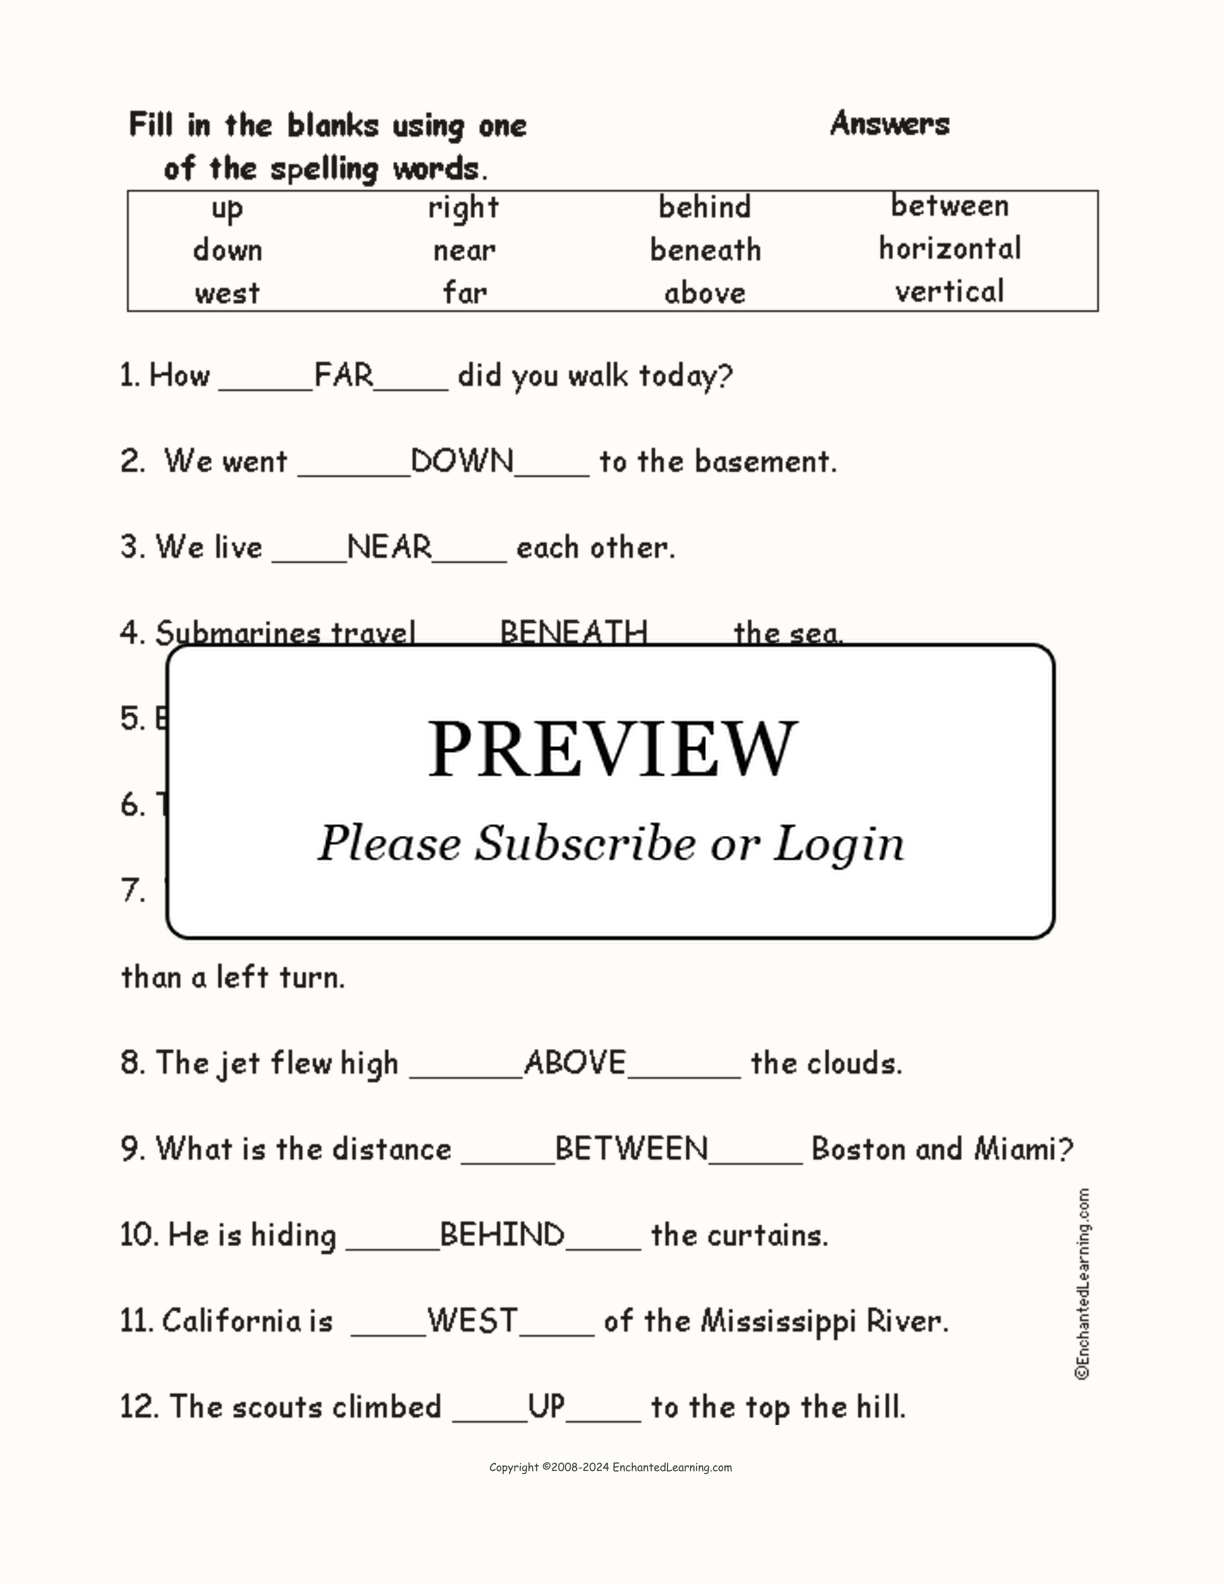 Location: Spelling Word Questions interactive worksheet page 2